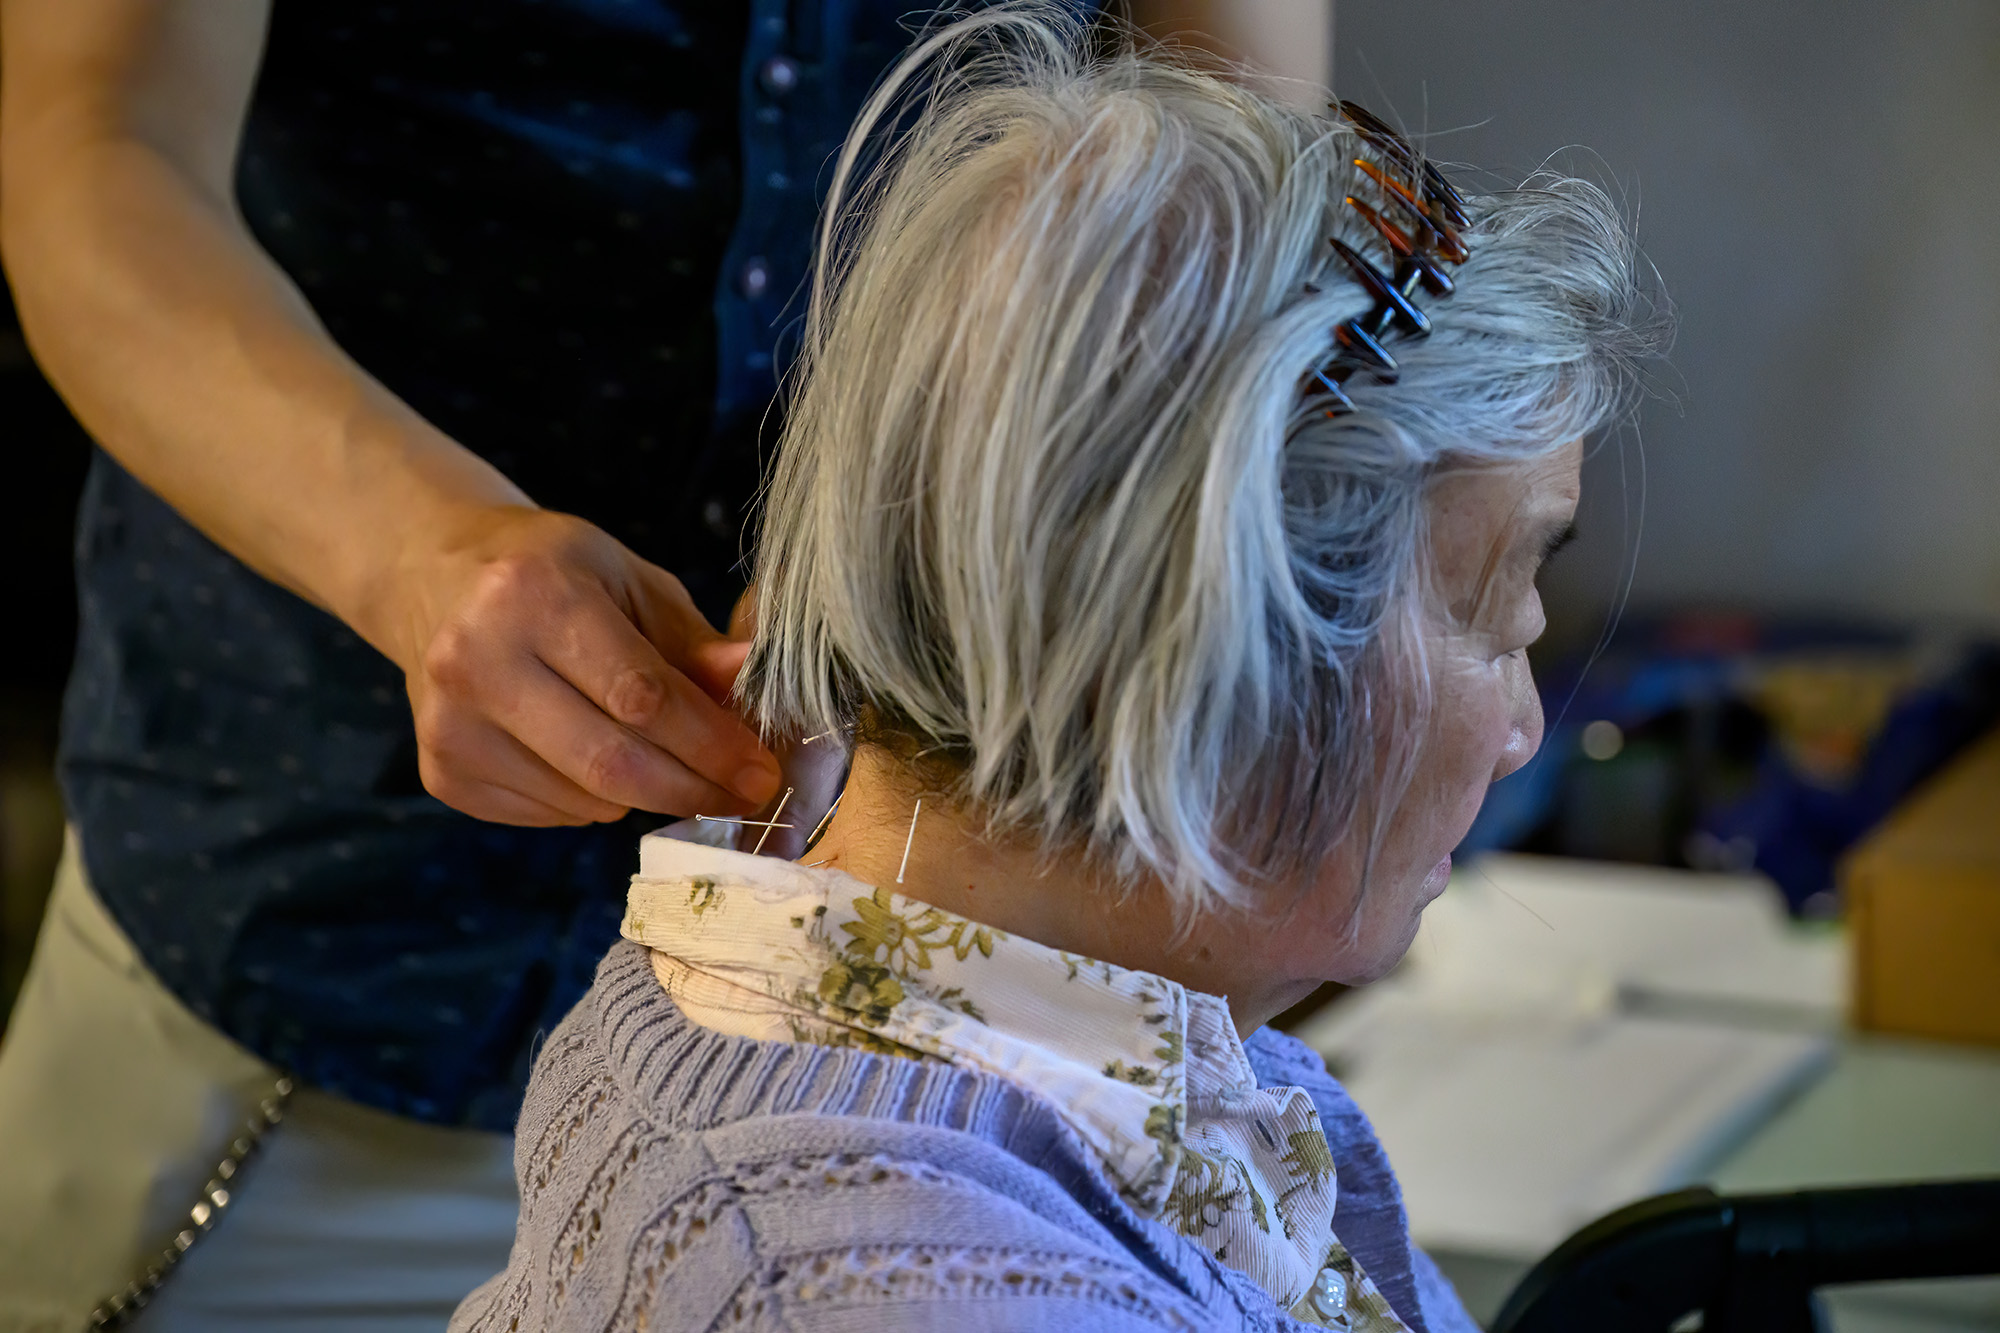 An elderly woman being treated with acupuncture.